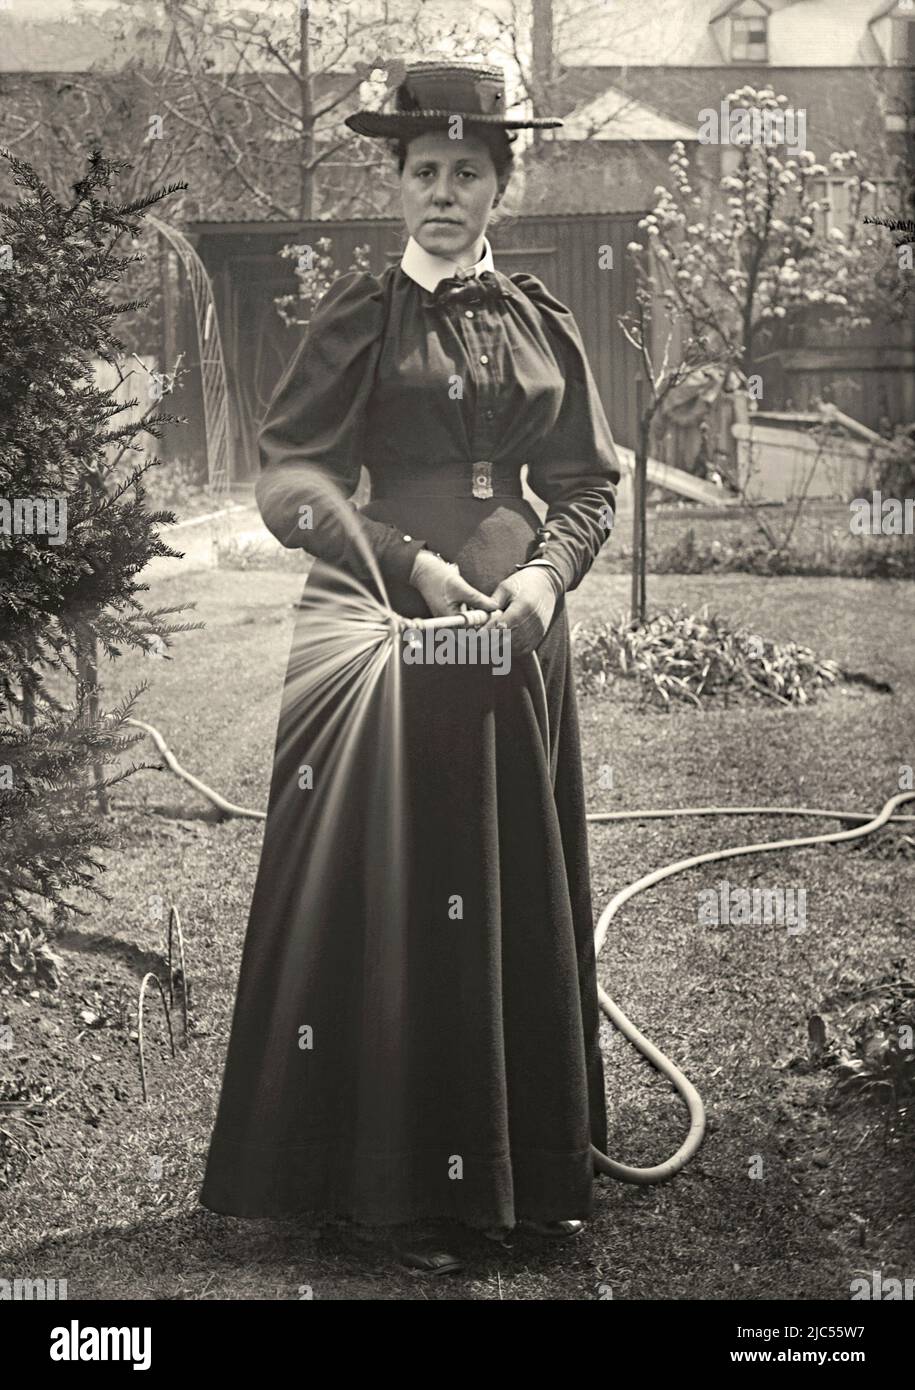 A woman using a hose to water her back garden, UK c. 1900. She wears smart clothing, including a hat and gloves, for the task. This is from an old Victorian glass negative – a vintage 1800s/1900s photograph. Stock Photo